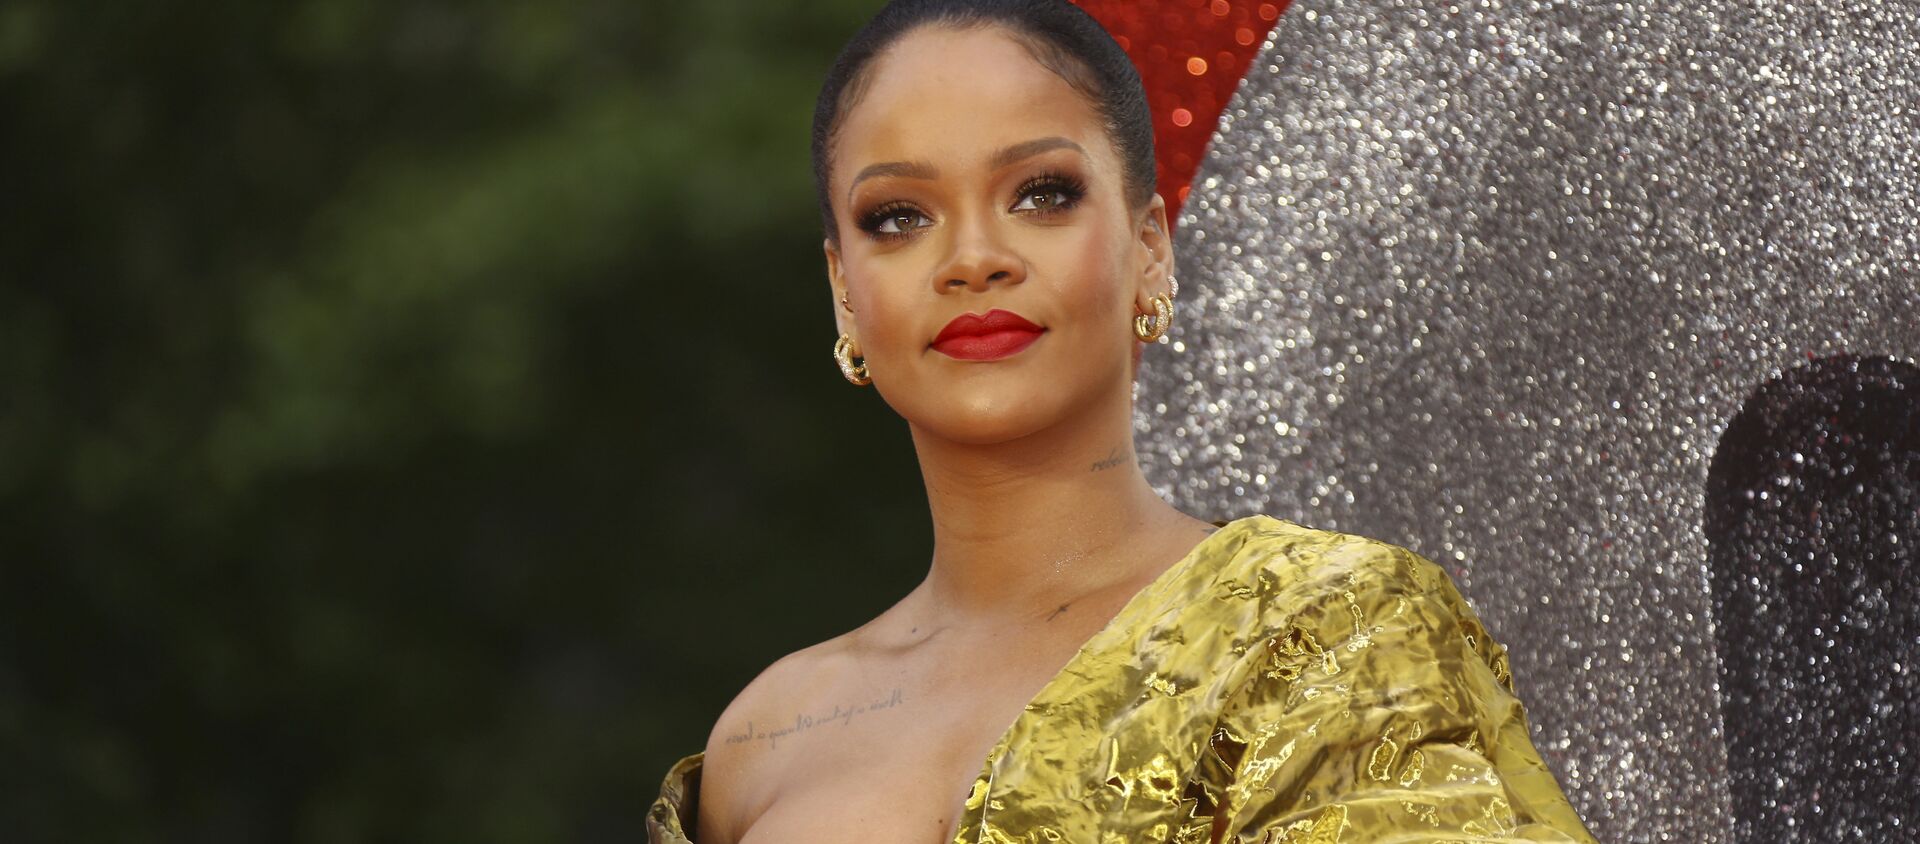 Rihanna poses for photographers upon arrival at the premiere of the film 'Ocean's 8' in central London, Wednesday, June 13, 2018 - Sputnik International, 1920, 03.02.2021